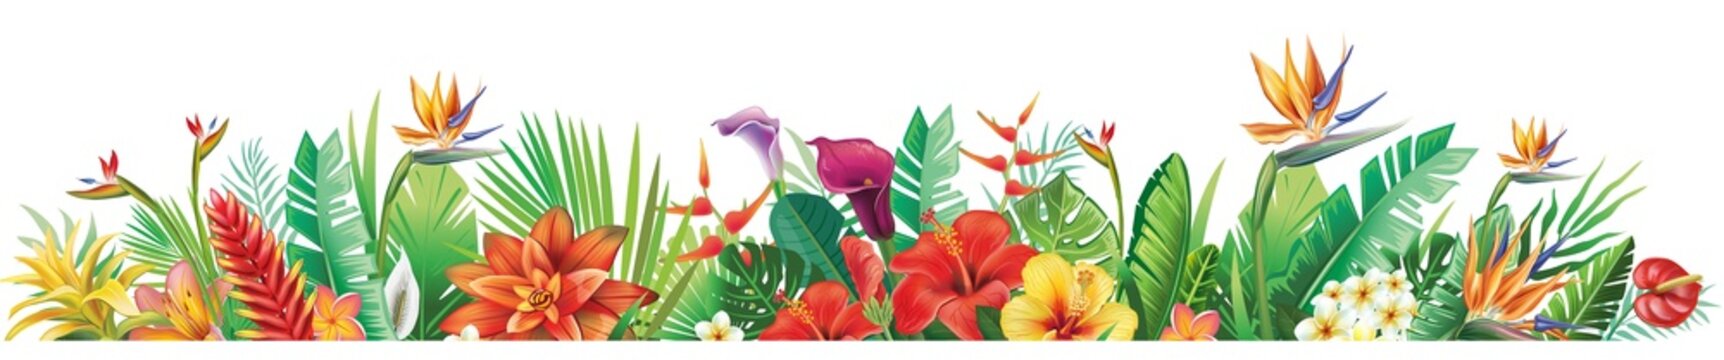 Border with tropical plants and flowers Floral vector illustration